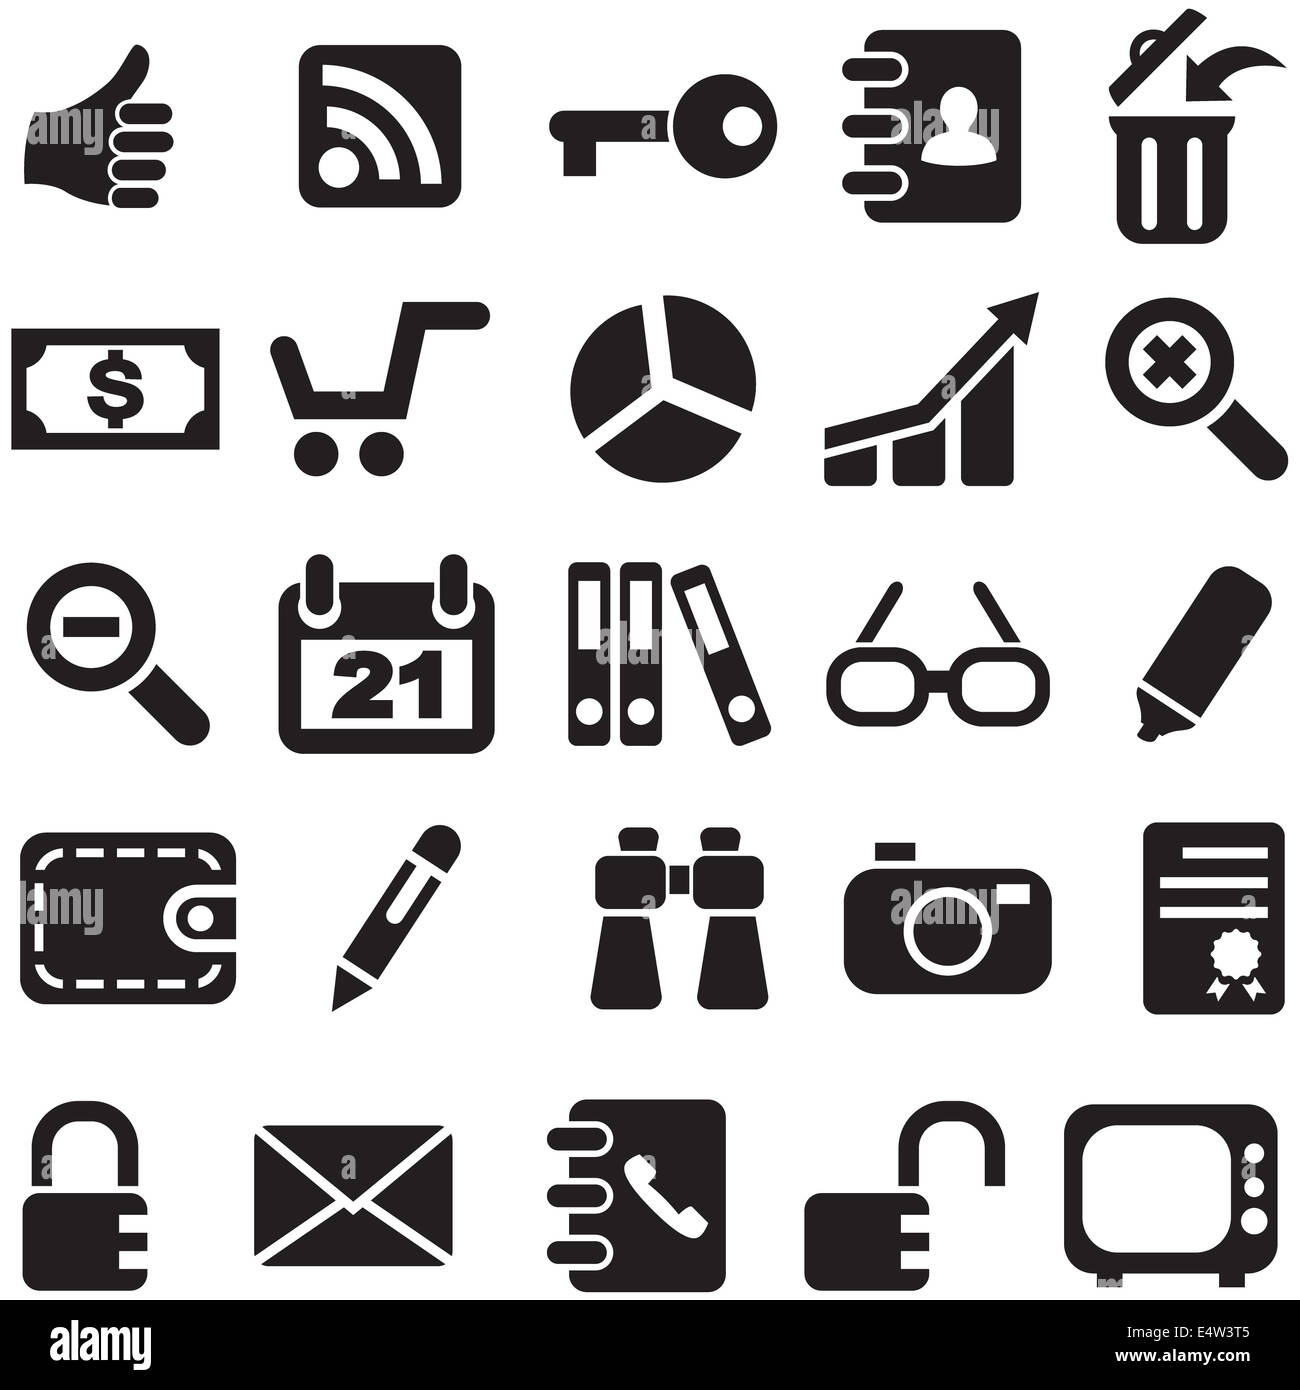 Collection icons. Stock Photo